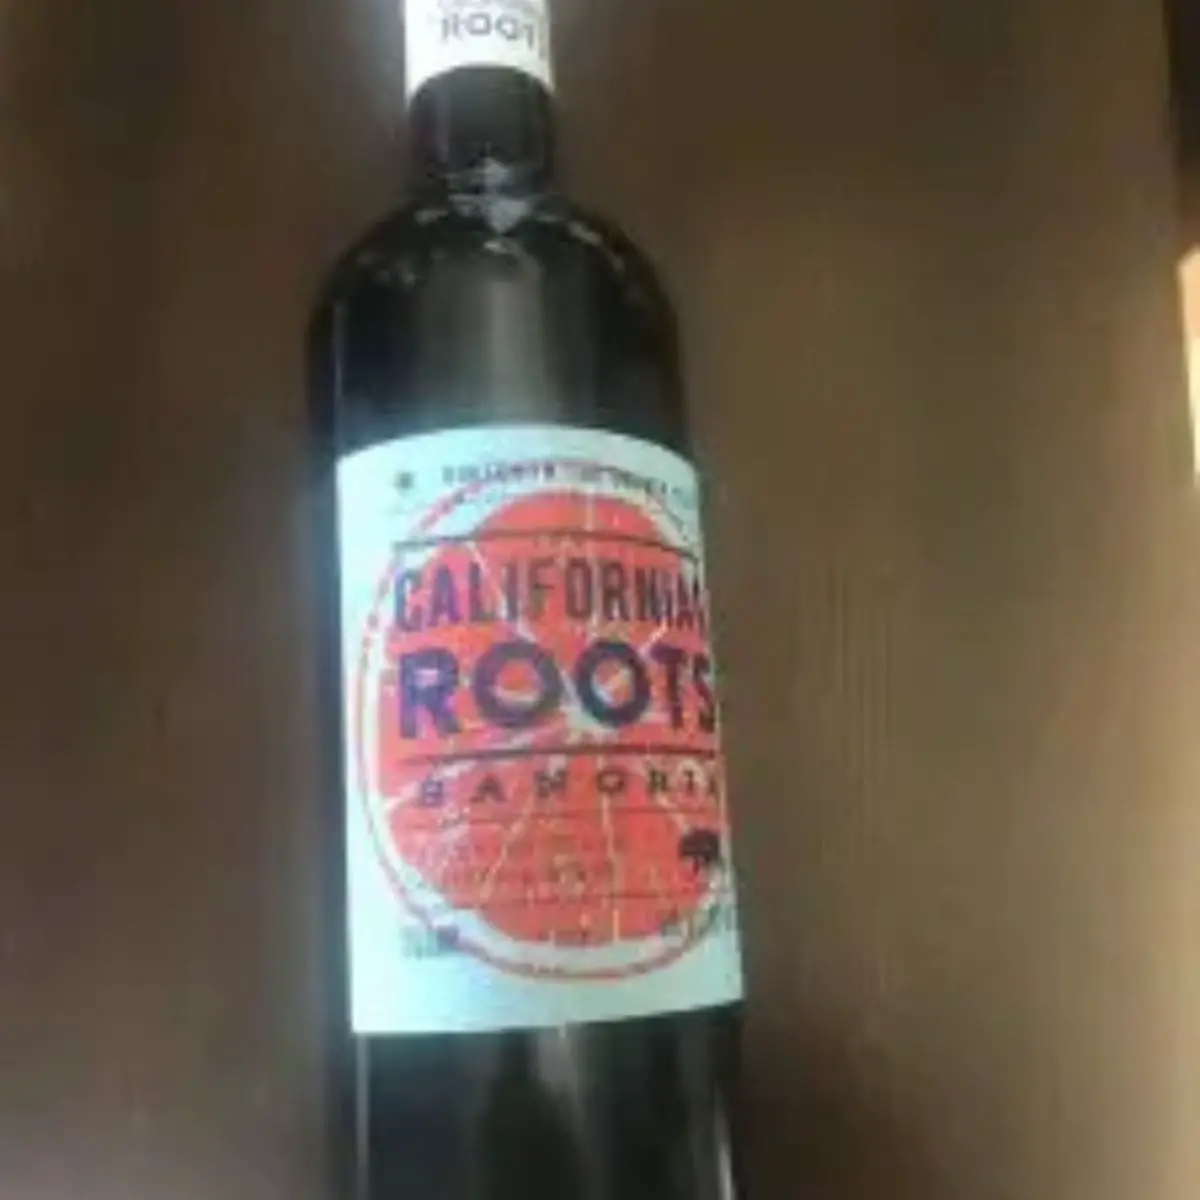 California Roots Sangria Red Wine bottle